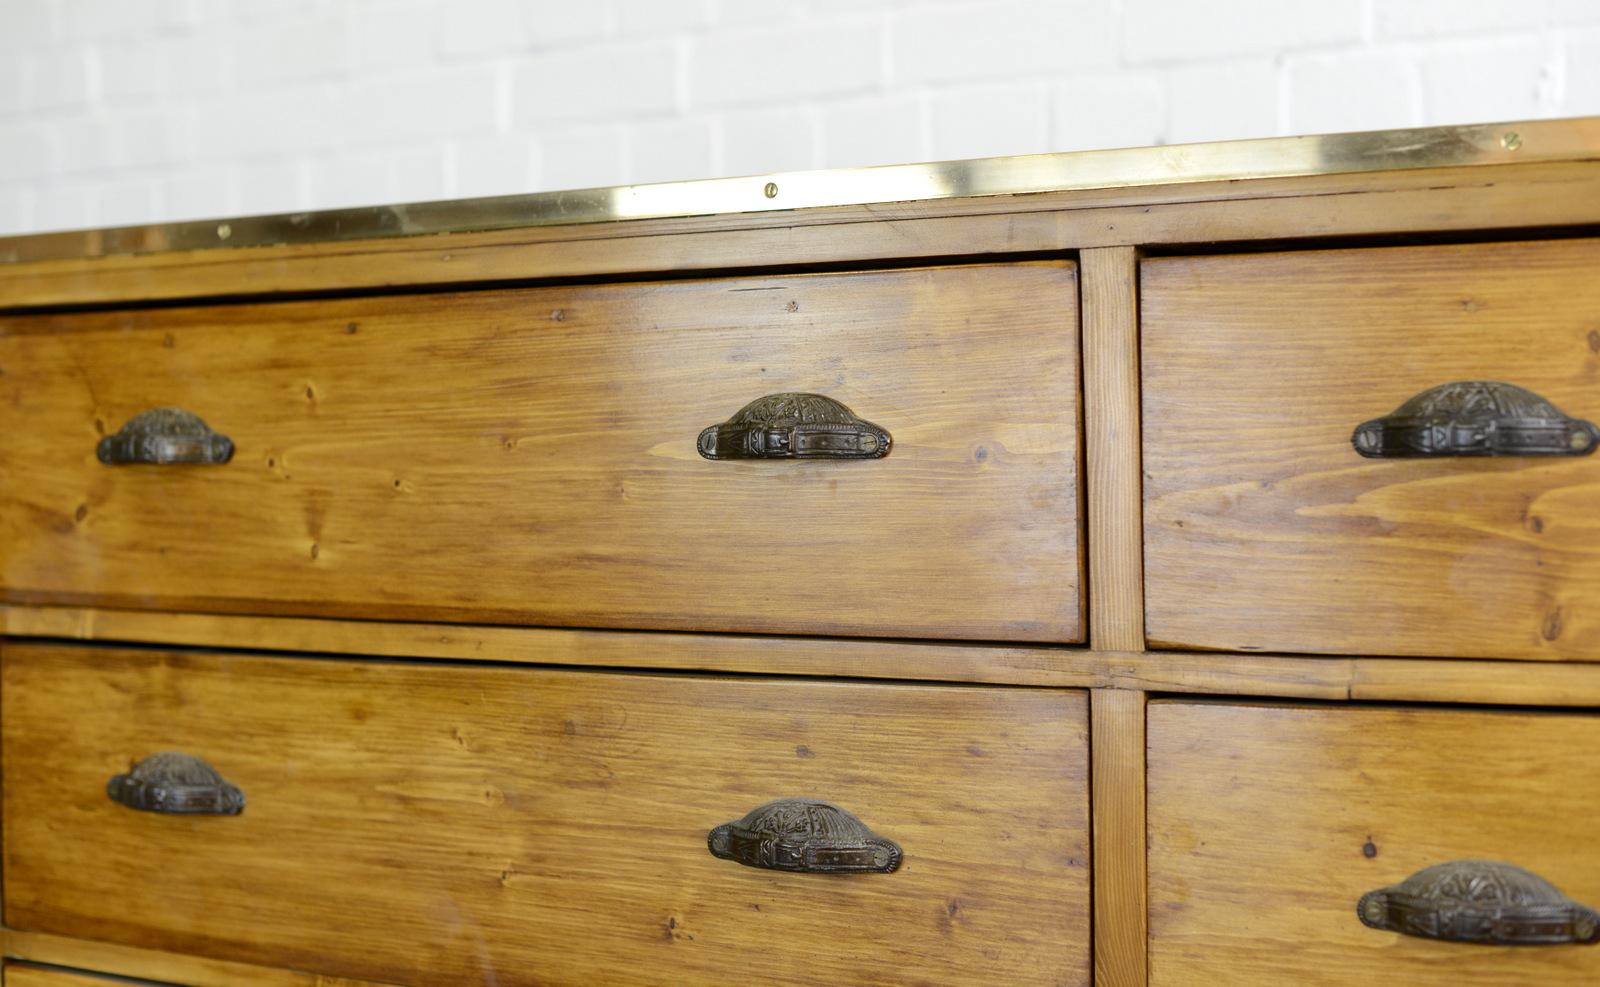 Large Dutch tailors drawers, circa 1910

- Price is per cabinet (2 available)
- Ornate cast iron handles
- Brass edging
- Solid pine drawers
- Salvaged from a tailors in central Amsterdam
- Dutch, 1910
- Measures: 171cm wide x 76cm deep x